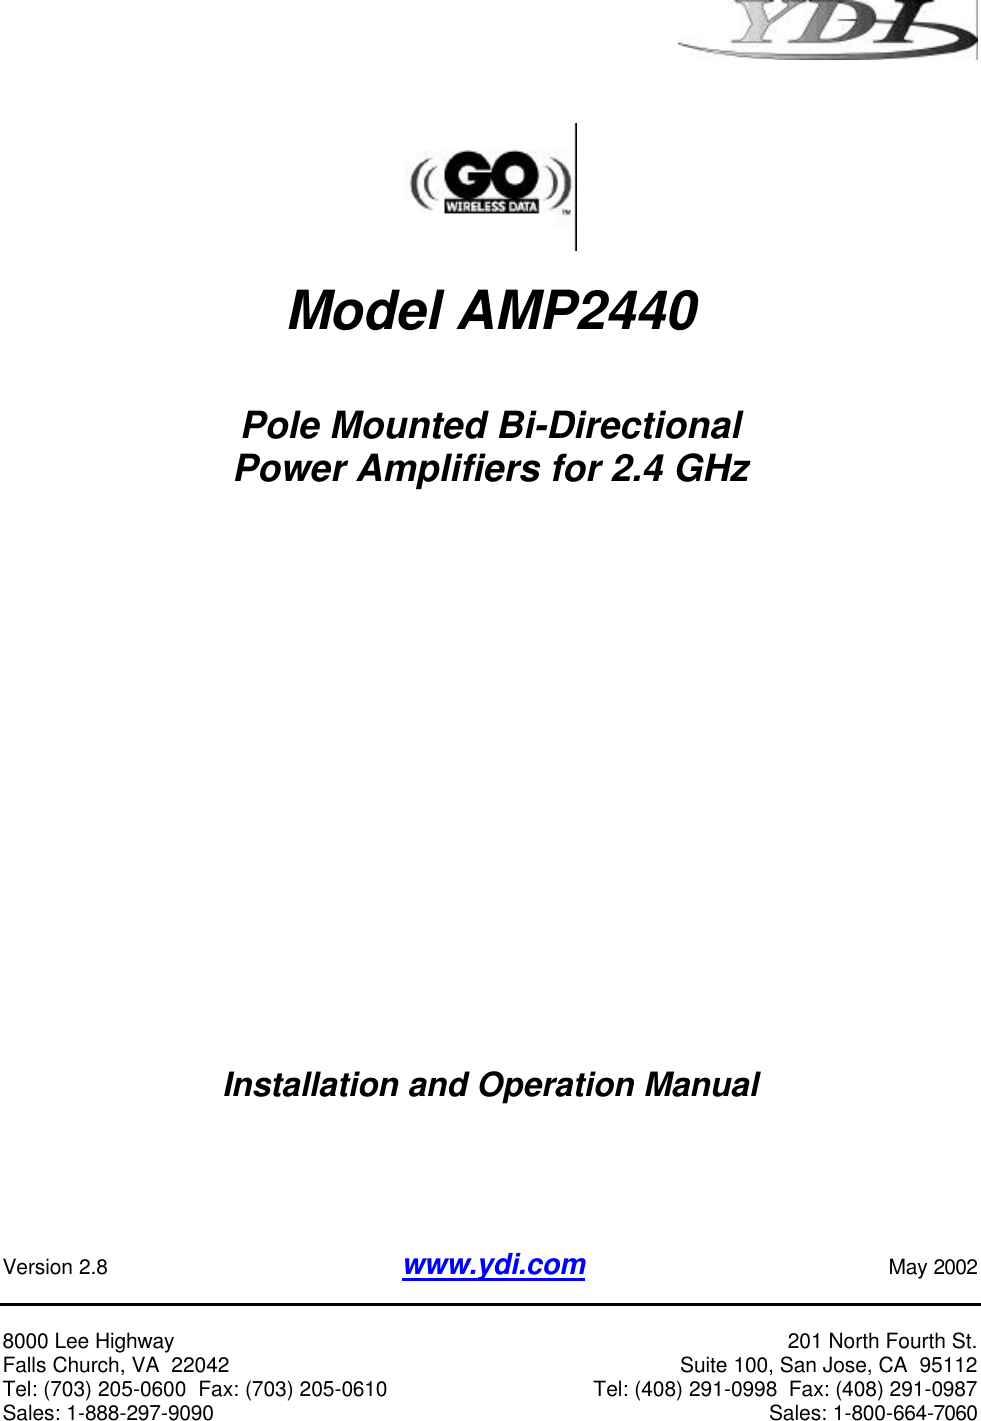      Model AMP2440  Pole Mounted Bi-Directional Power Amplifiers for 2.4 GHz                     Installation and Operation Manual      Version 2.8       www.ydi.com                                                 May 2002   8000 Lee Highway              201 North Fourth St. Falls Church, VA  22042                  Suite 100, San Jose, CA  95112 Tel: (703) 205-0600  Fax: (703) 205-0610             Tel: (408) 291-0998  Fax: (408) 291-0987 Sales: 1-888-297-9090                                  Sales: 1-800-664-7060  